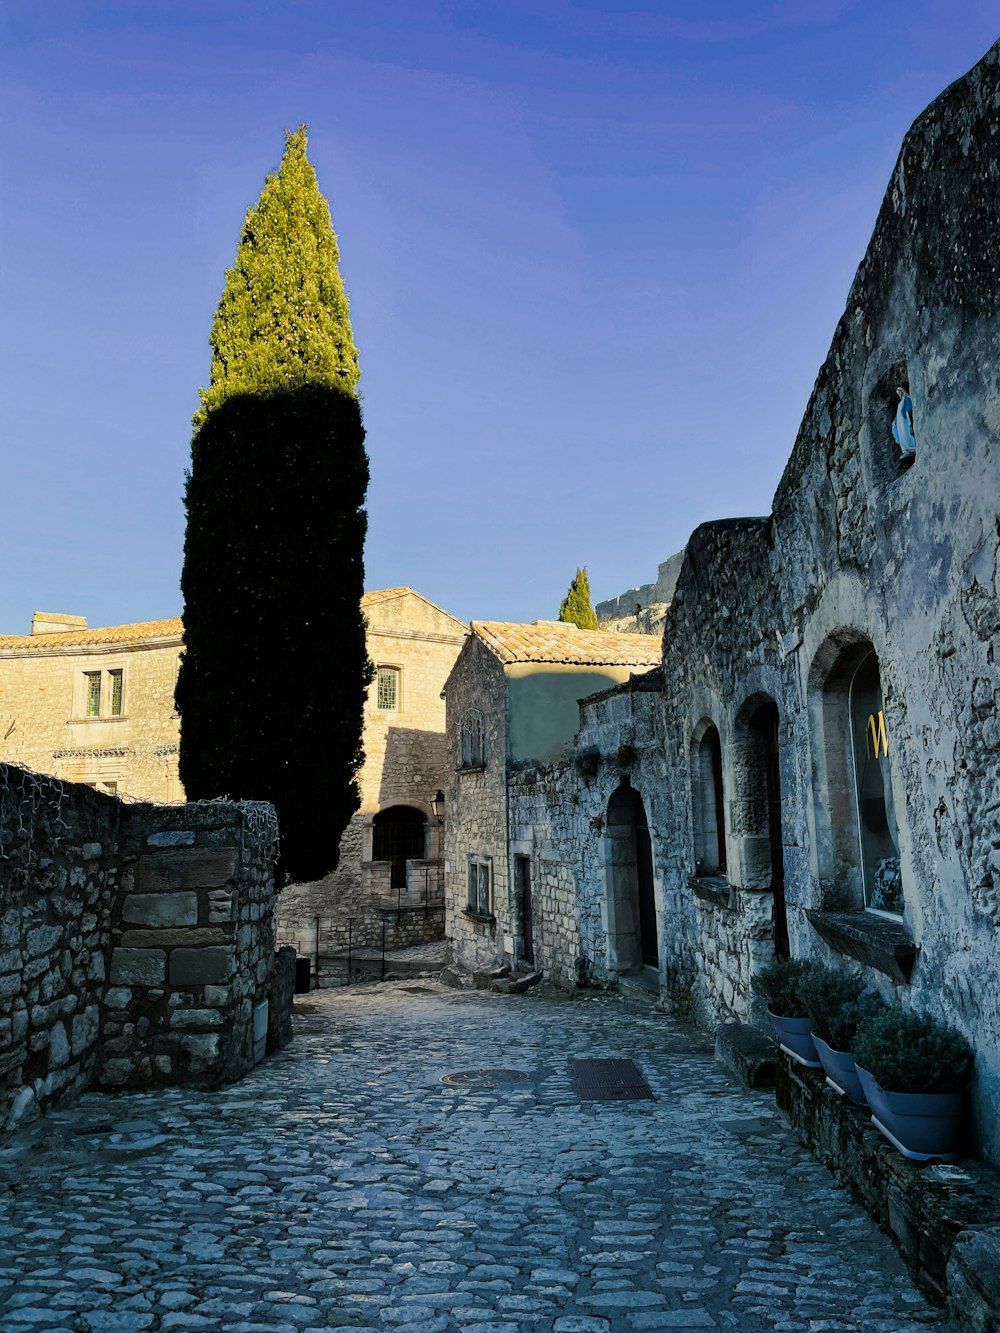 a cobblestone street with a stone building in the background